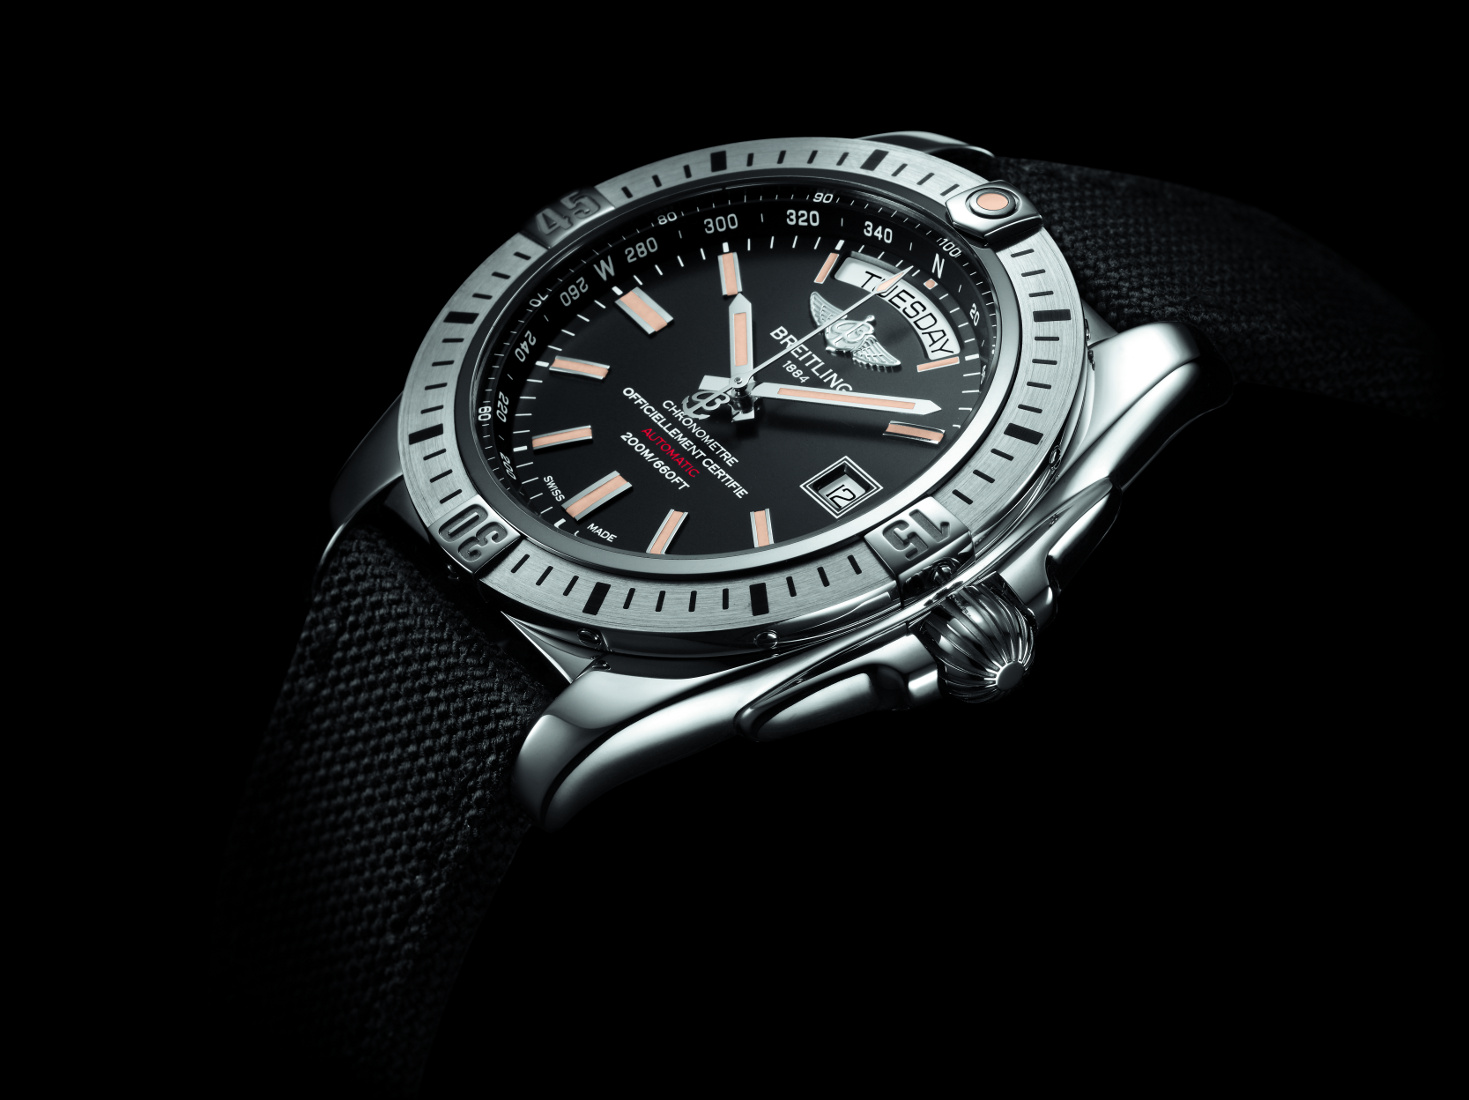 Equipping with screw-in crown, this steel case replica Breitling Galactic watch also shows 200m waterproof function. And inside beats the self-winding movement, with the reliable and durable performance.